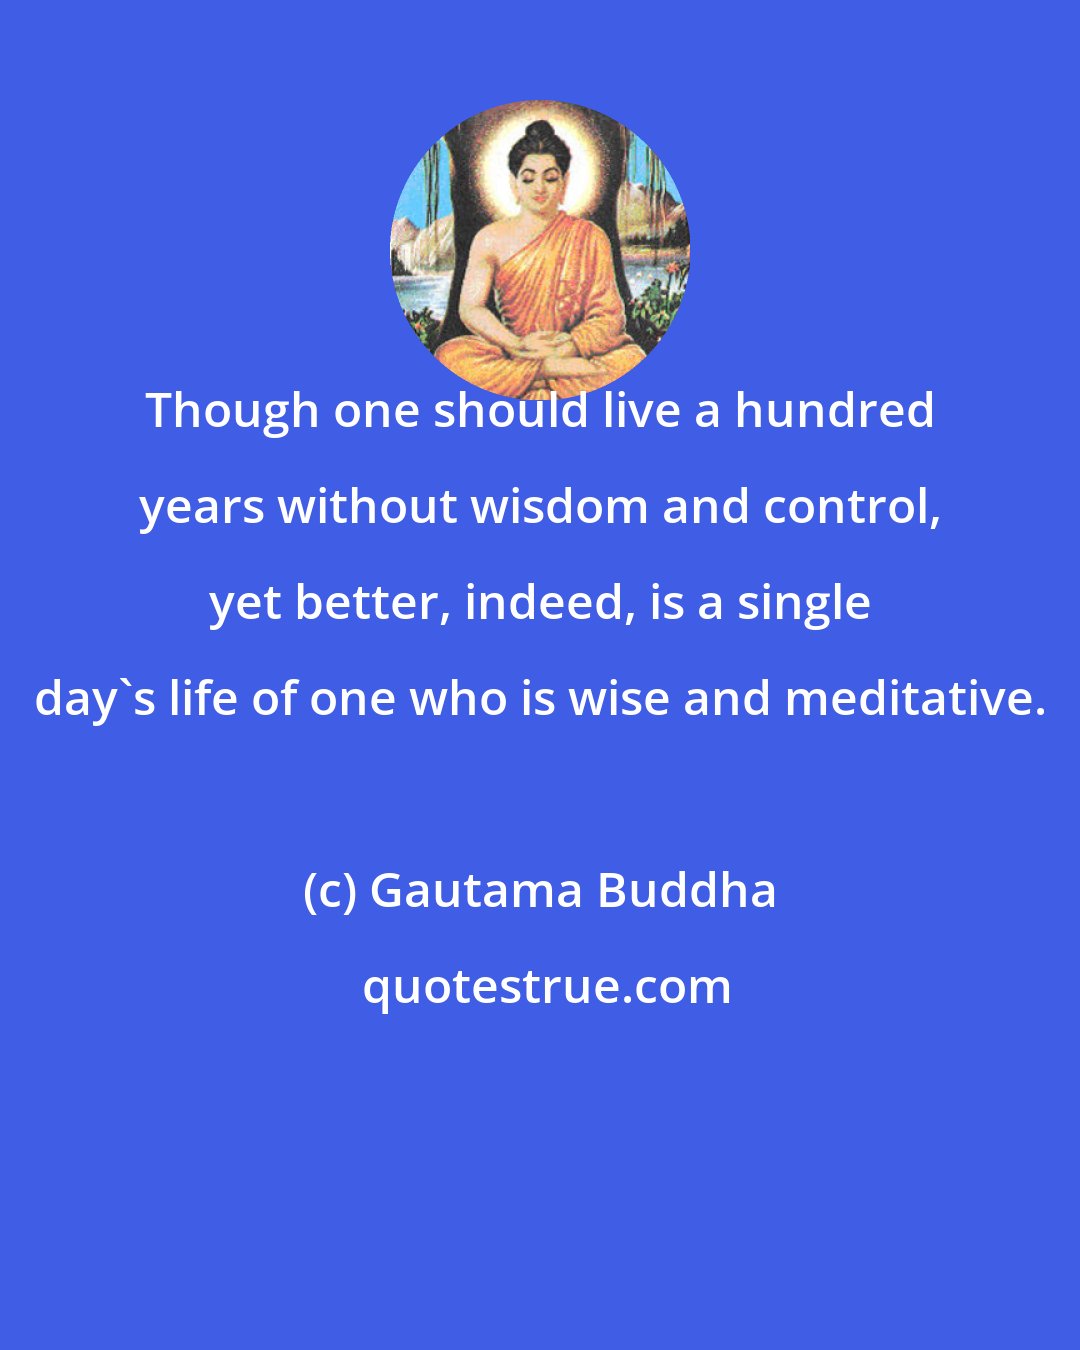 Gautama Buddha: Though one should live a hundred years without wisdom and control, yet better, indeed, is a single day's life of one who is wise and meditative.